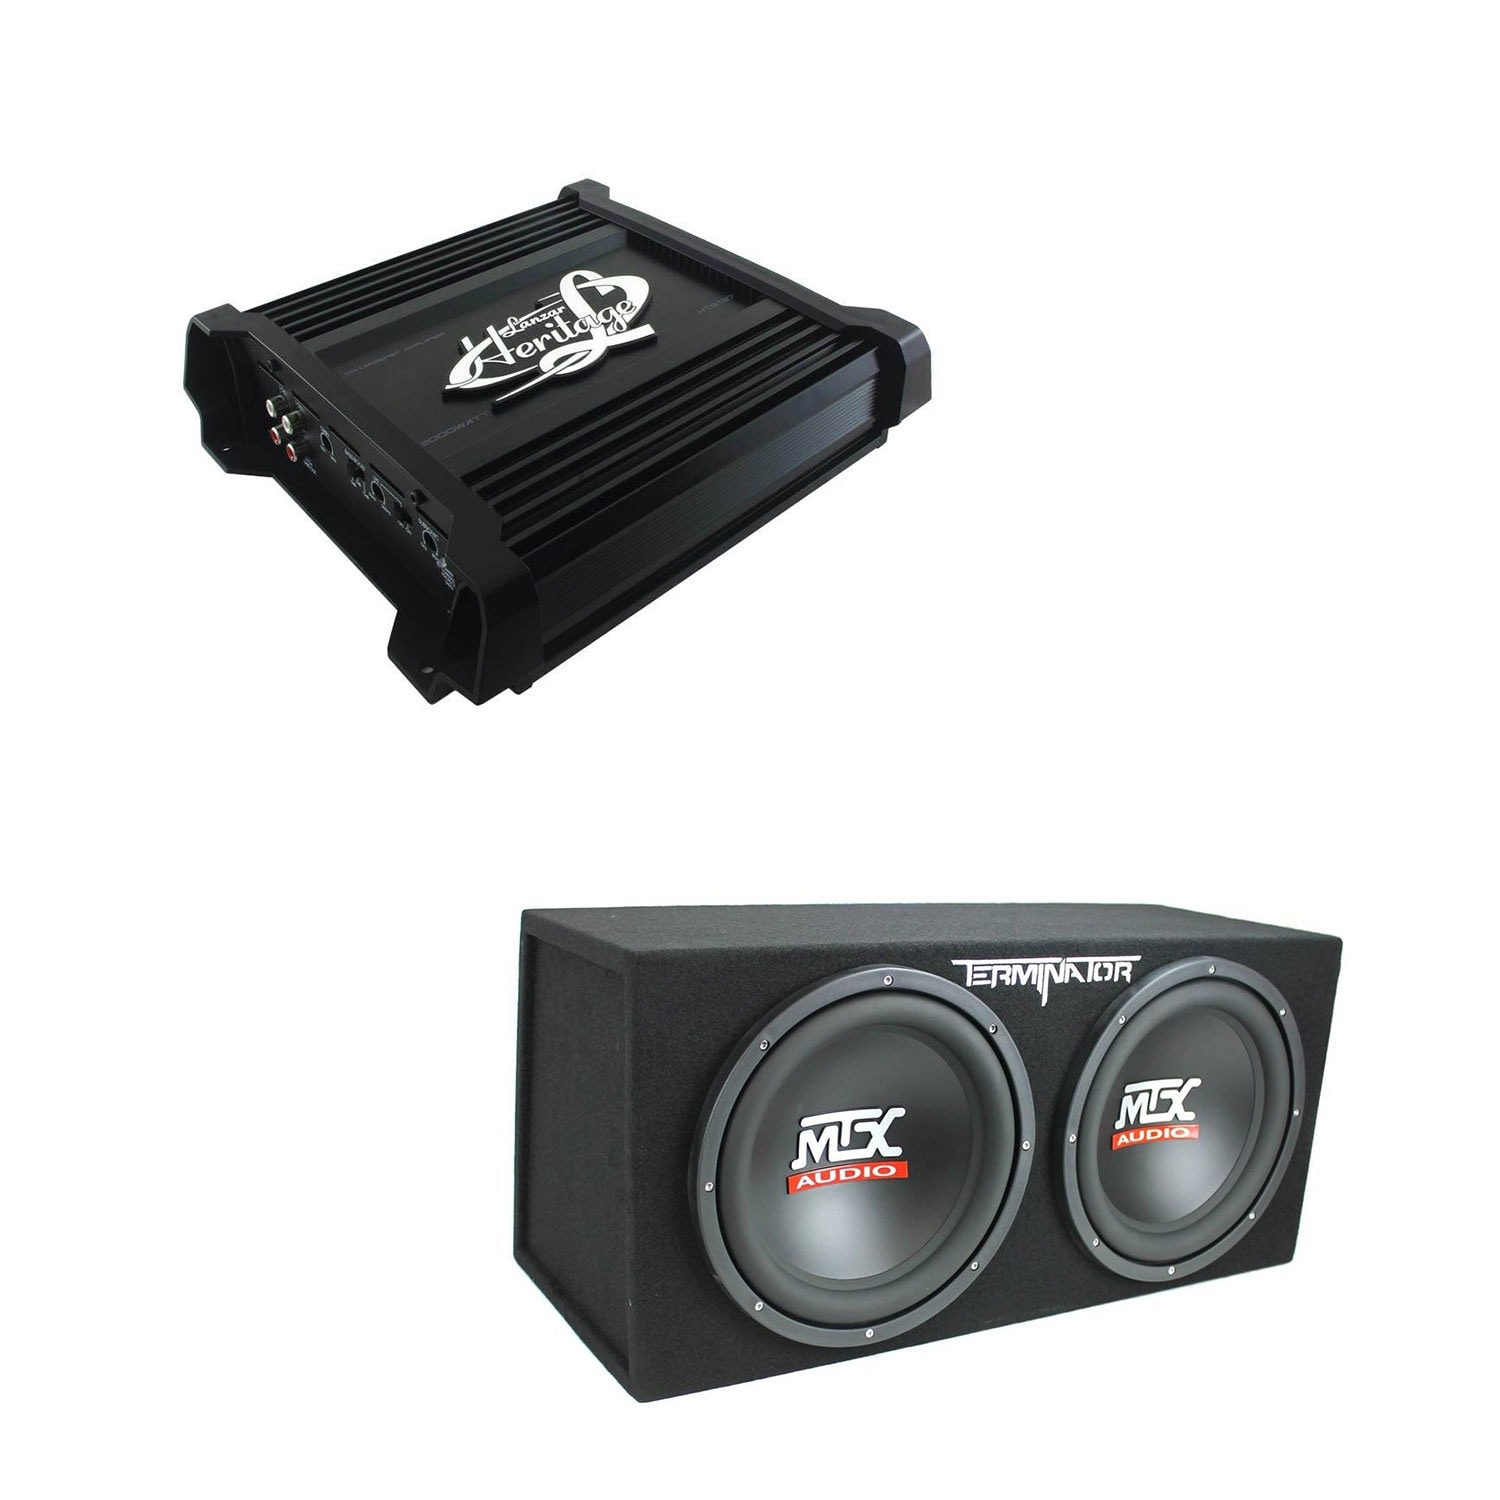 Lanzar Heritage Series 2000W Car Audio Amplifier with 120W Dual Loaded Subwoofer - Black - 2.2